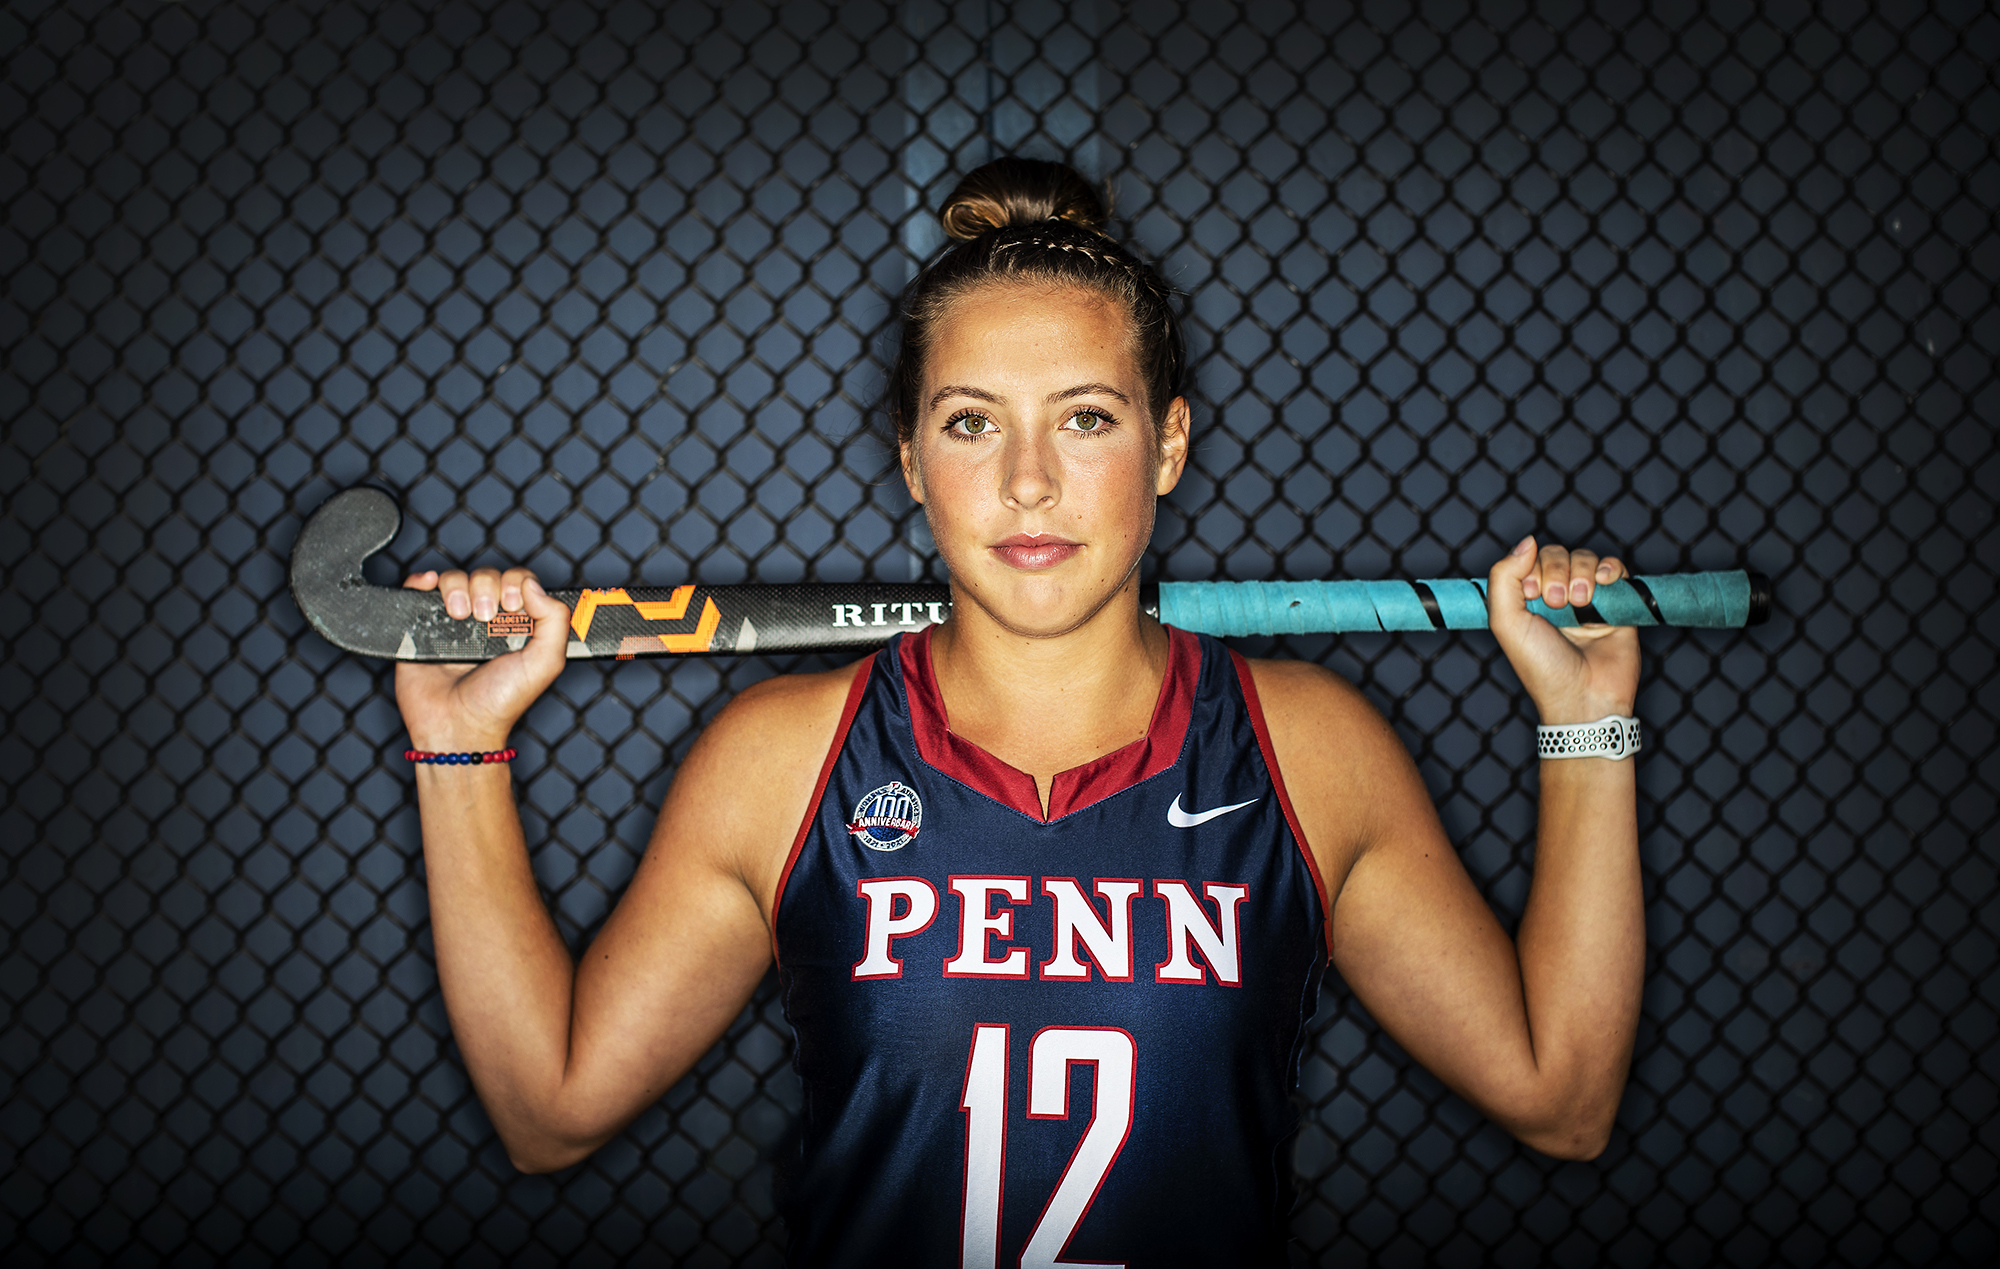 Banks holds her field hockey stick along her shoulders behind her neck.